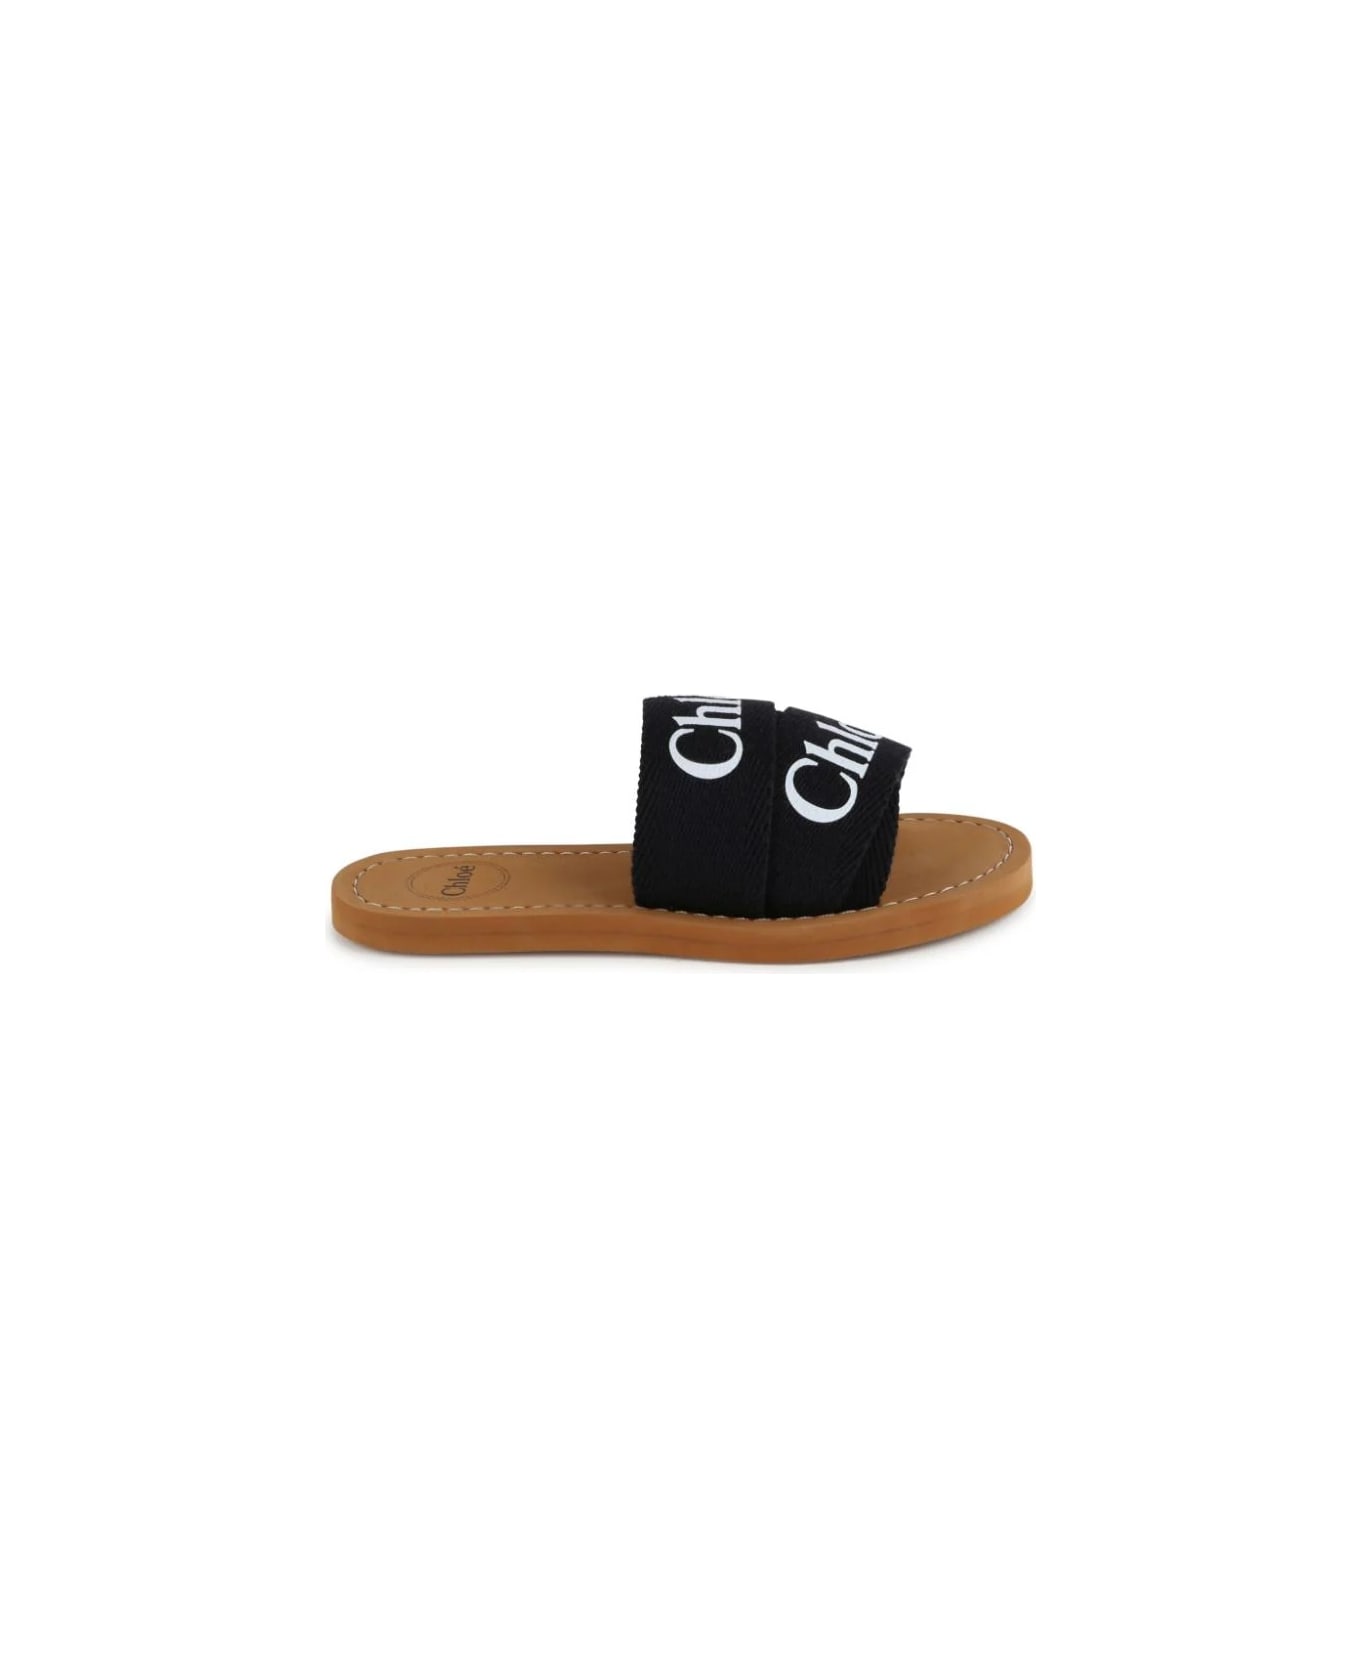 Chloé Woody Sandals In Black Canvas With Logo - Black シューズ